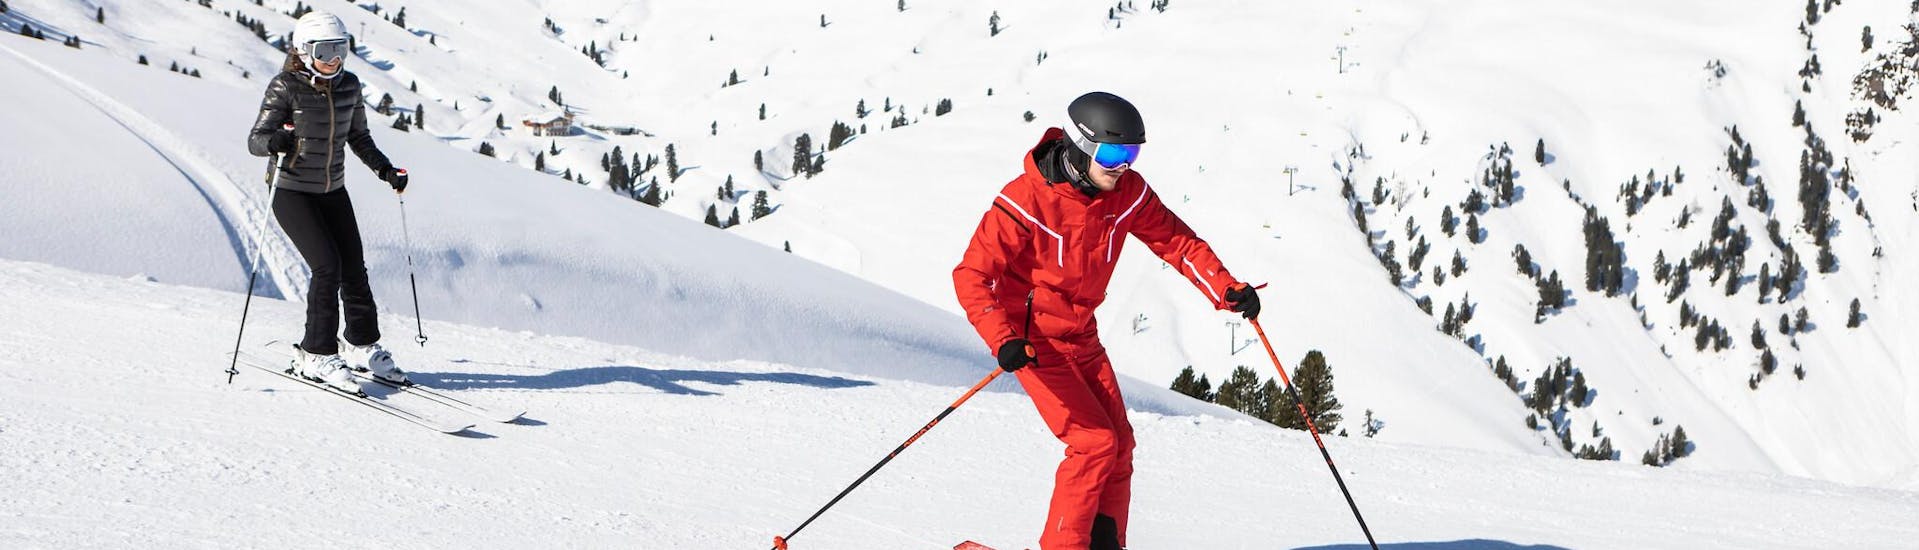 A skier practices the correct skiing technique during one of the private lessons in Sestriere.